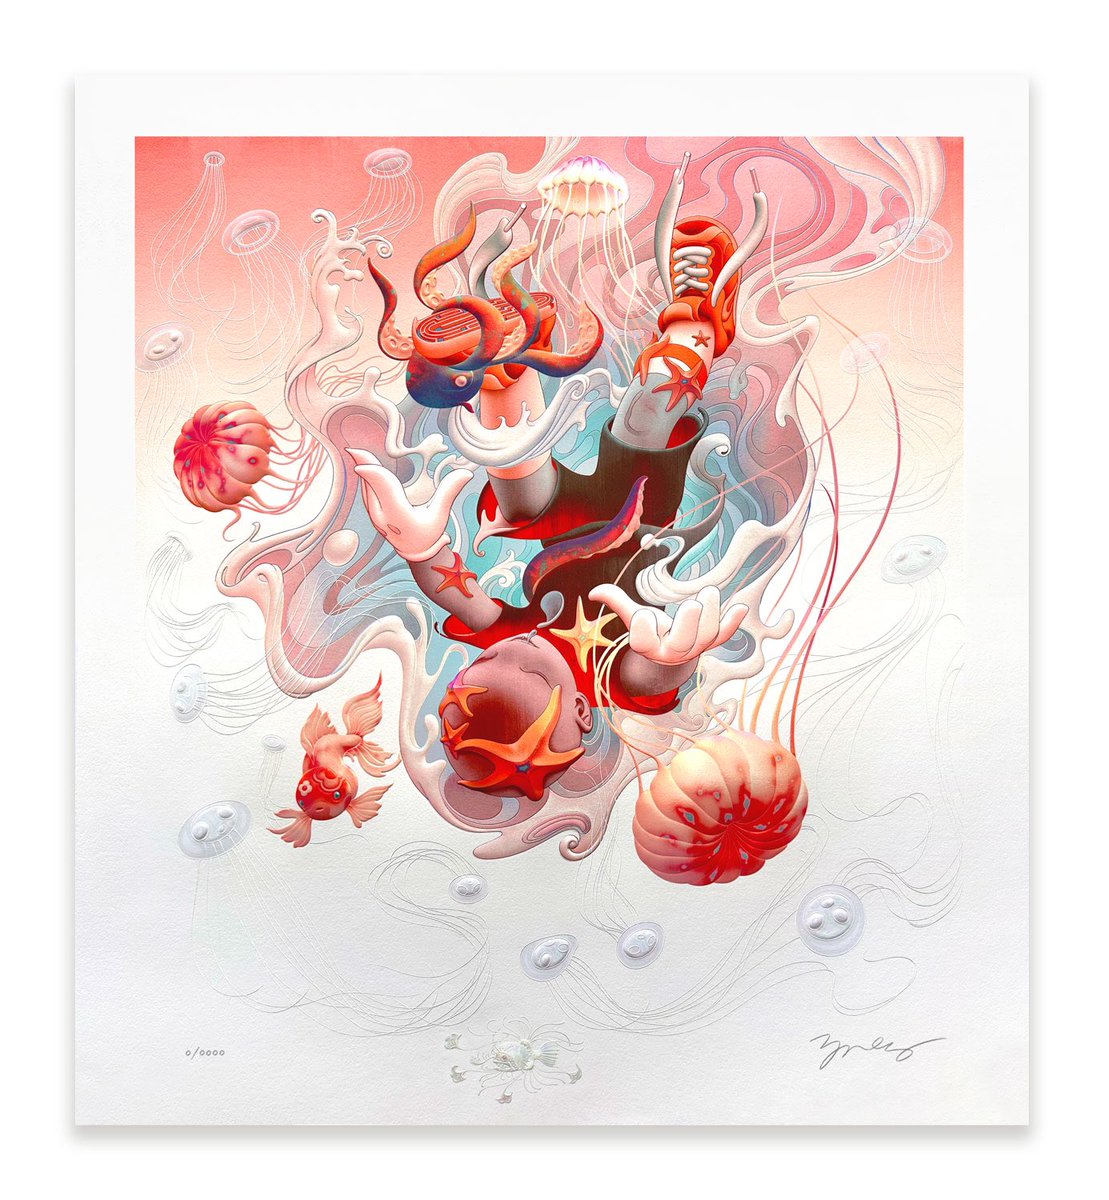 Descendent VI time limited edition releases tomorrow, May 14 at 8am PT ✨🪼✨ Details here 👉store.jamesjean.com